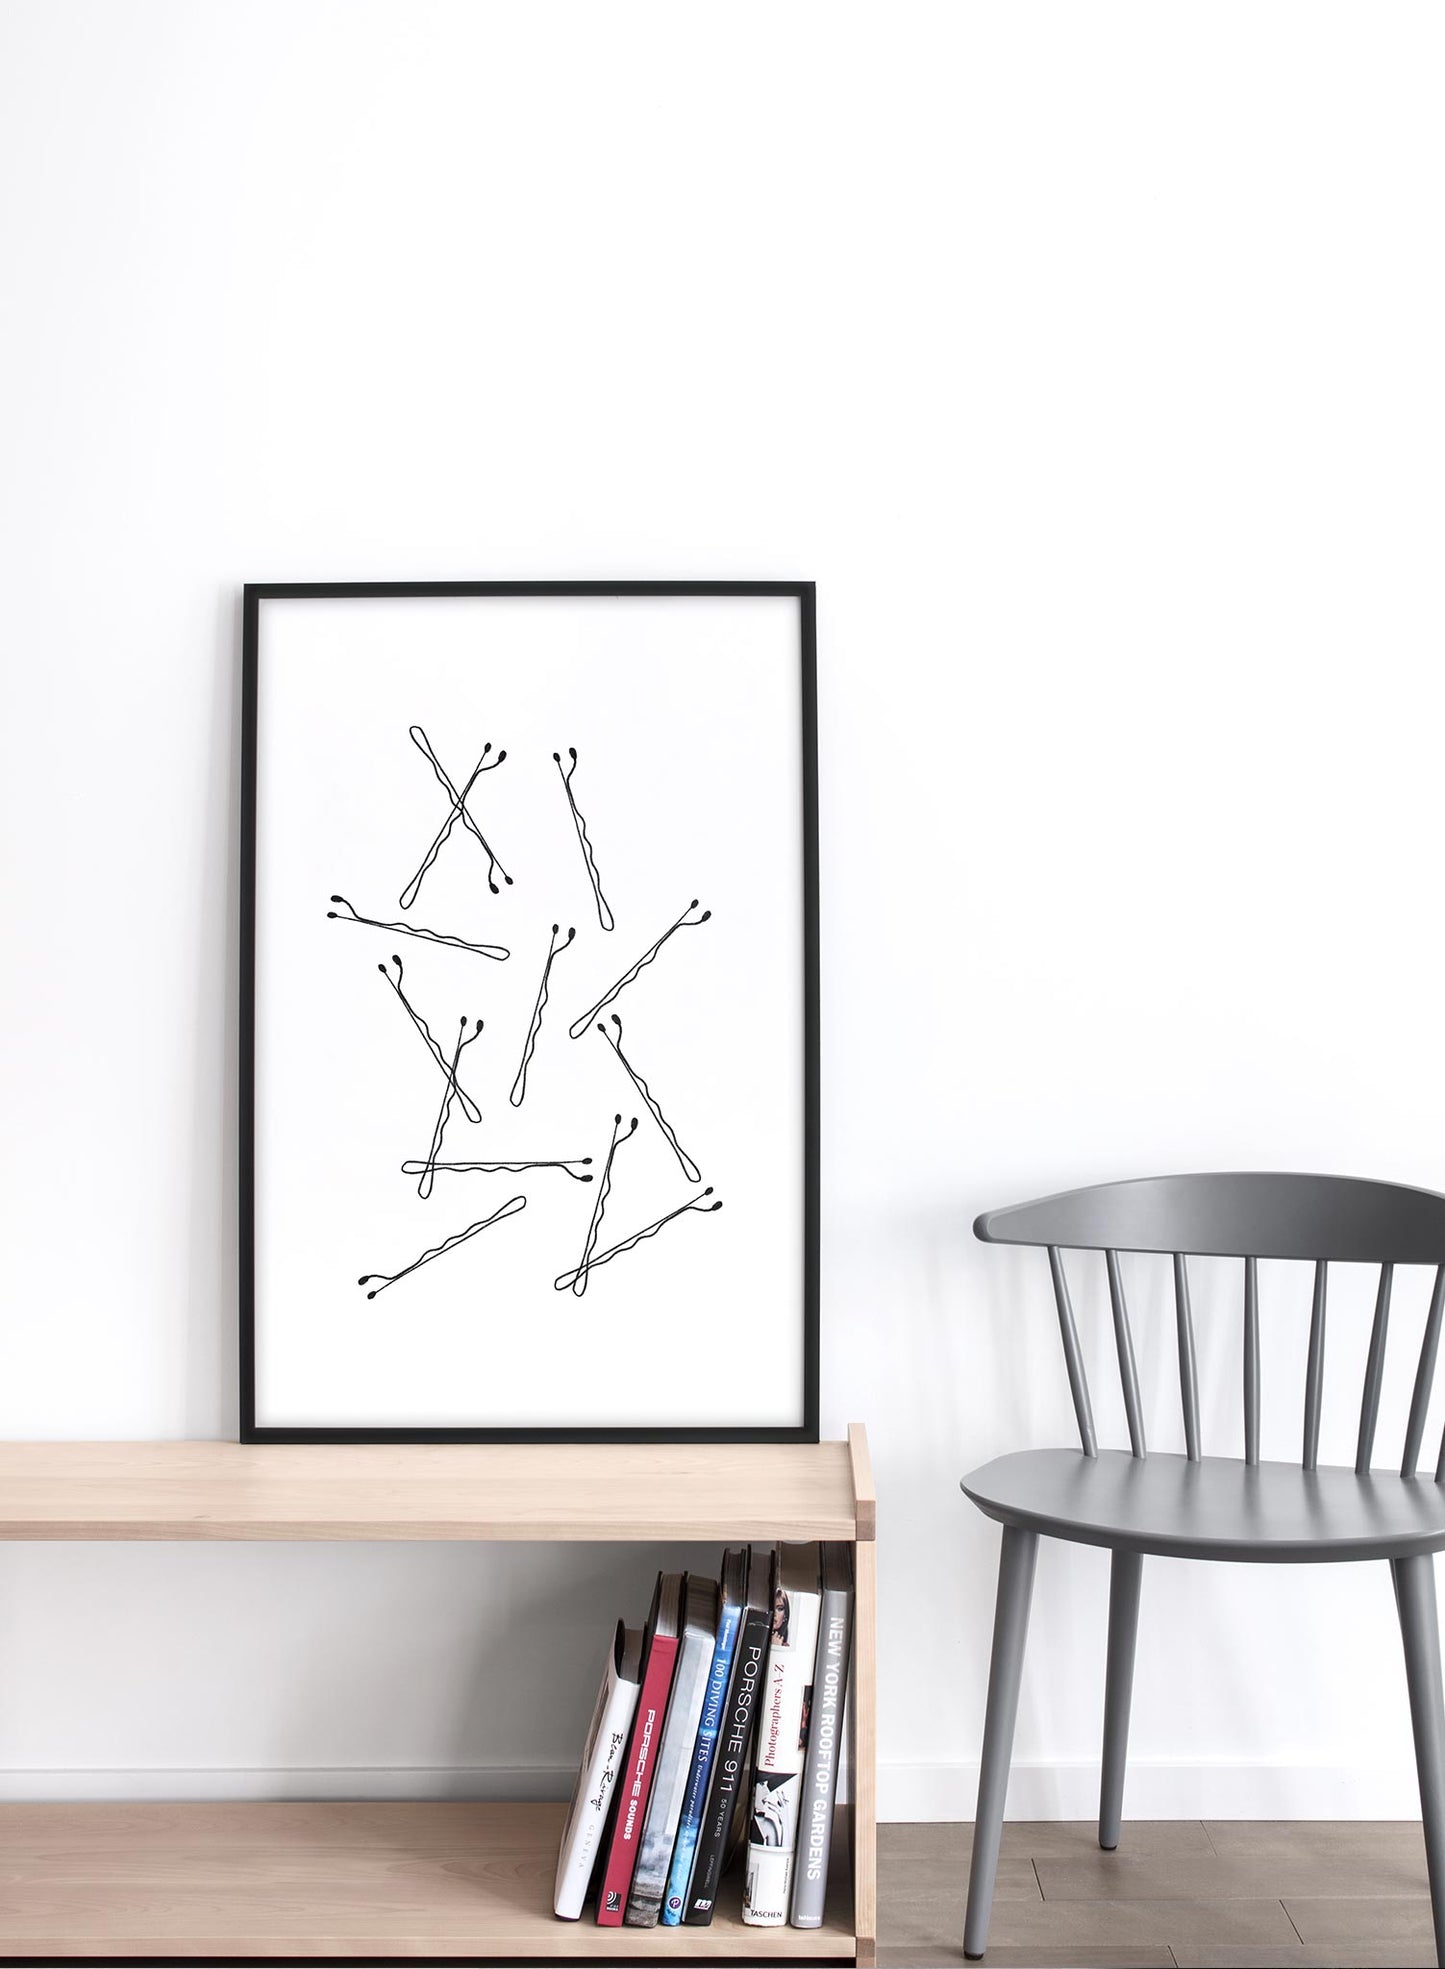 Fashion illustration poster by Opposite Wall with bobby pins - Lifestyle - Living Room